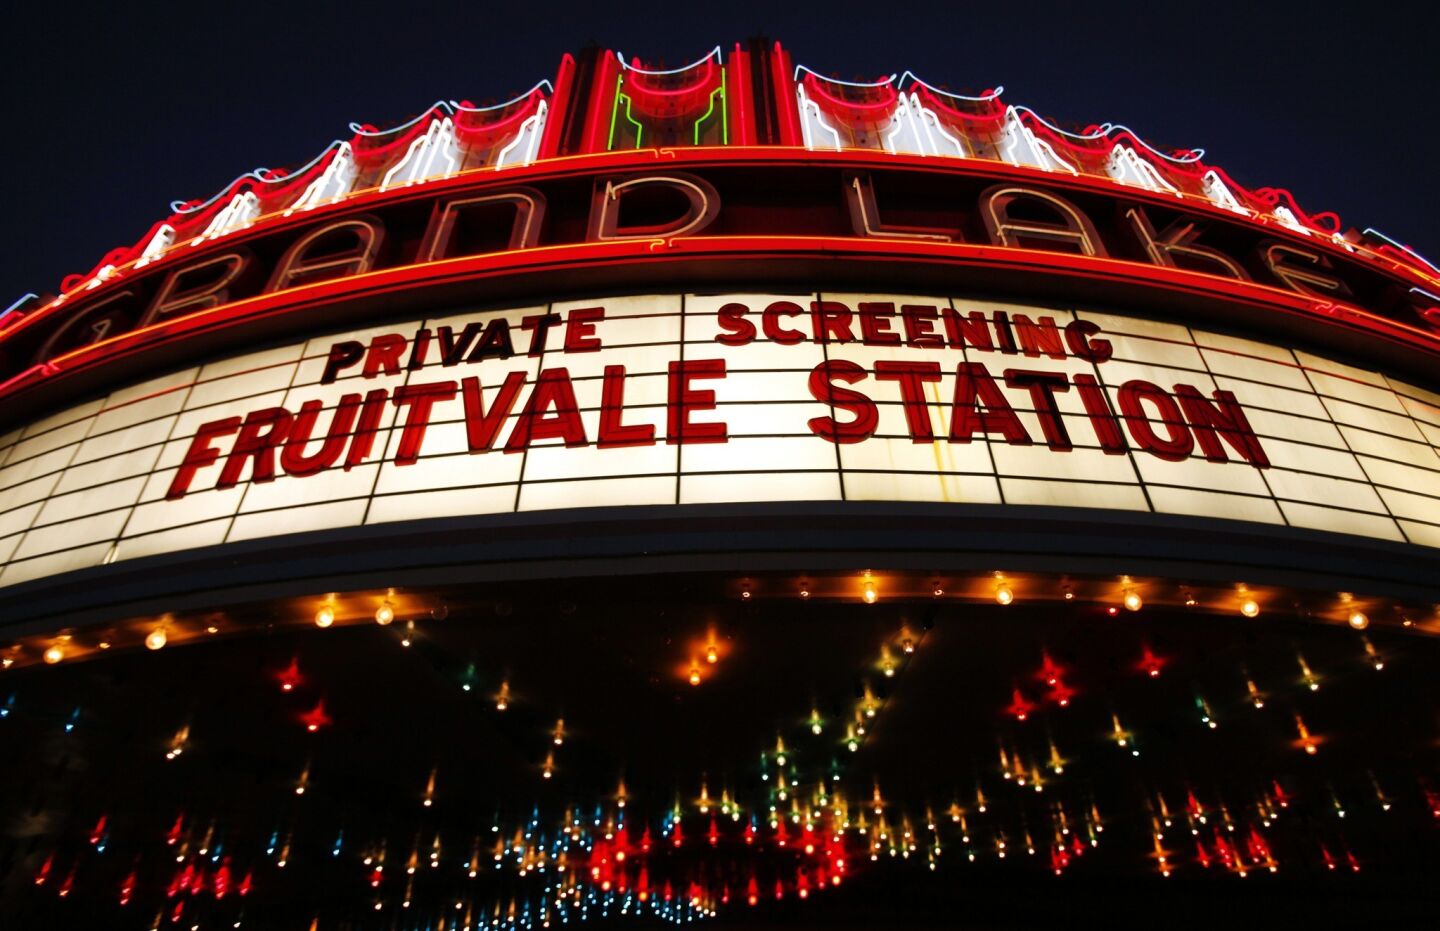 The marquee of the Grand Lake Theatre in Oakland announces the premiere of "Fruitvale Station" on June 20, 2013.